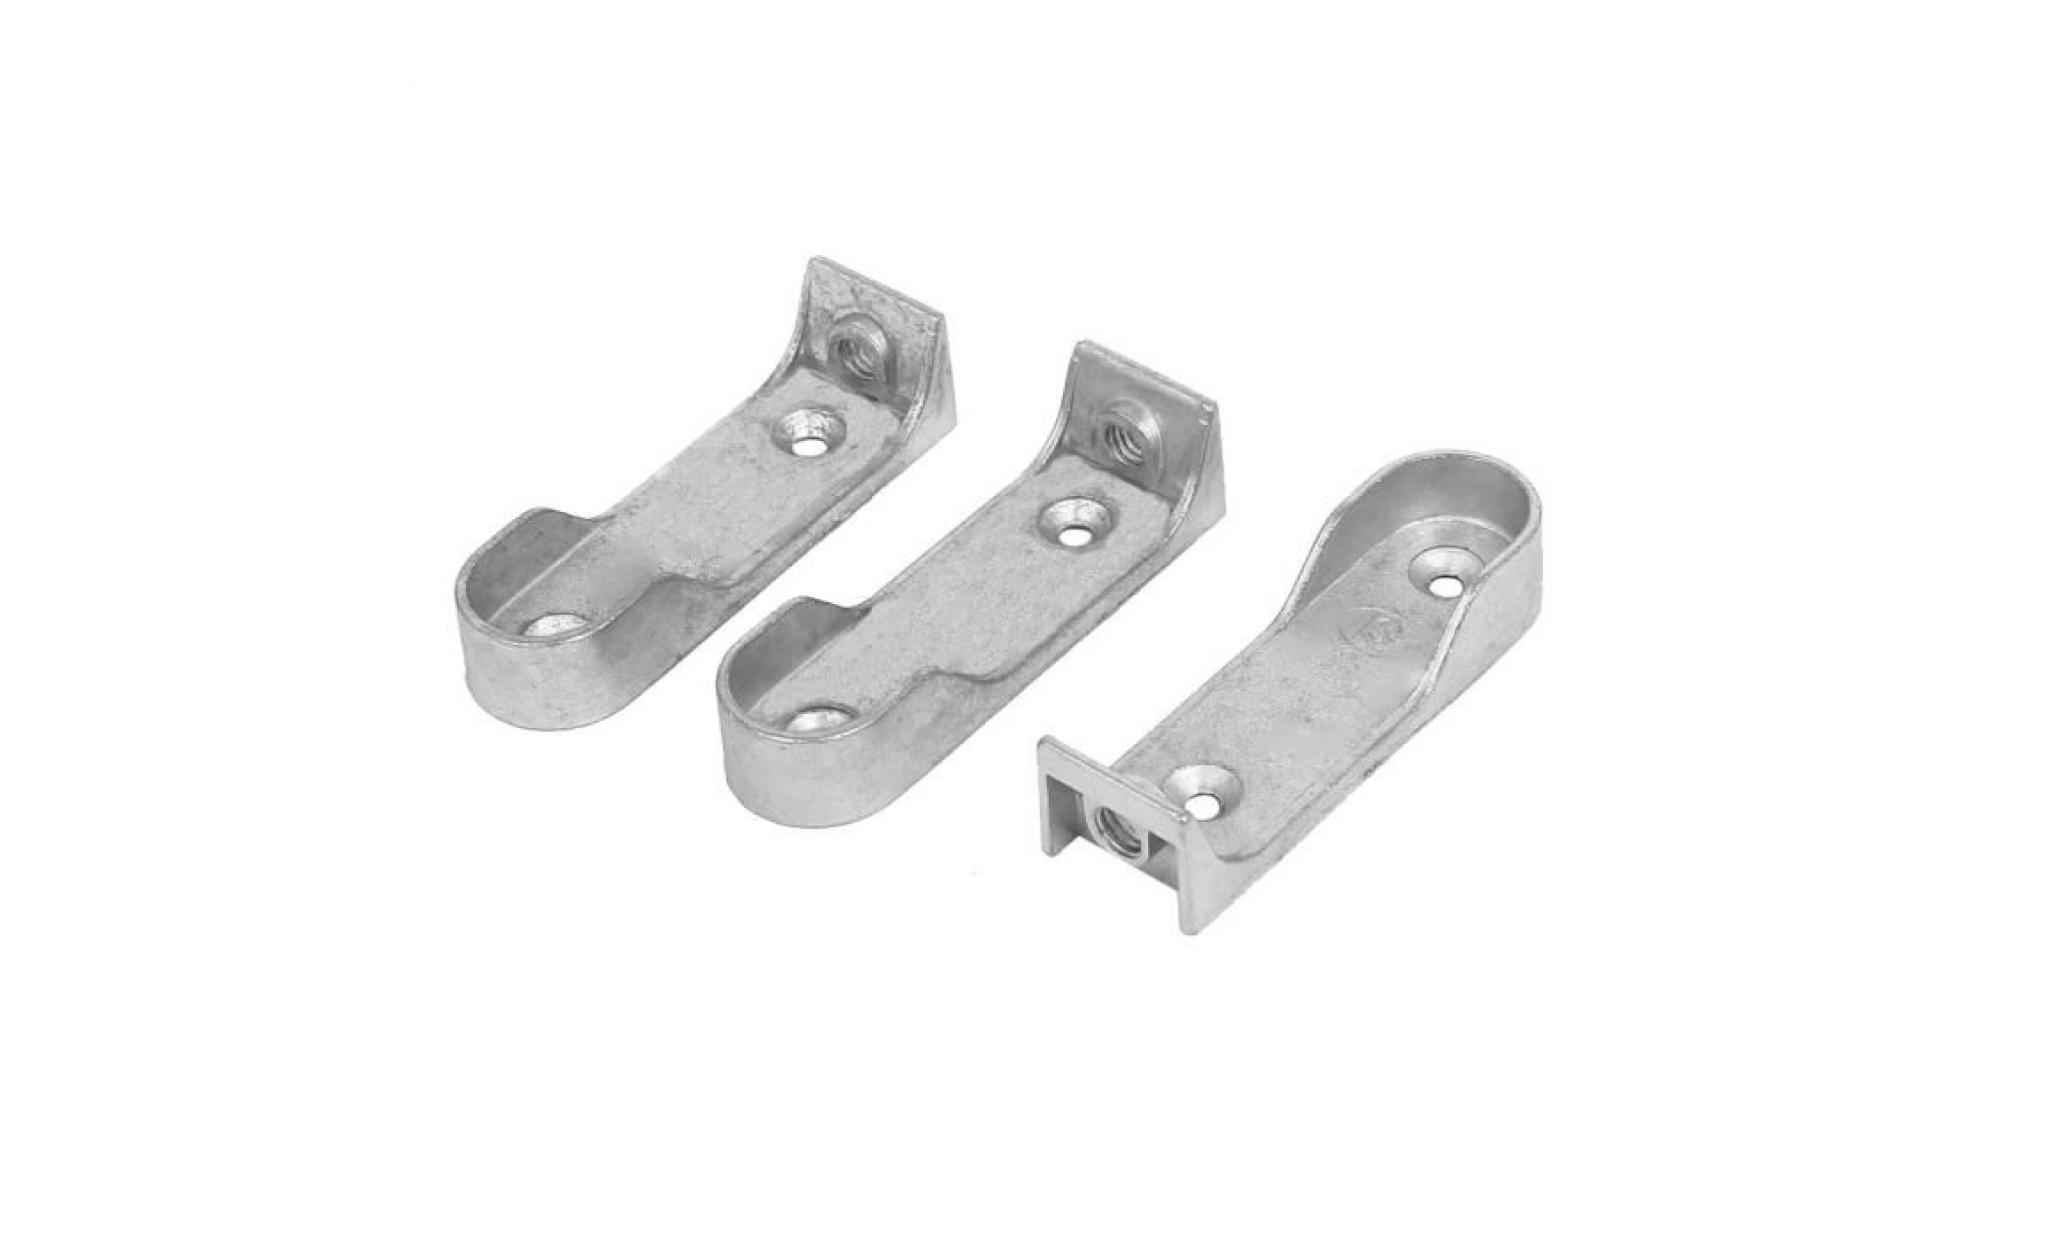 wardrobe rod end rail supports brackets holder silver tone 3pcs for 16mm tube